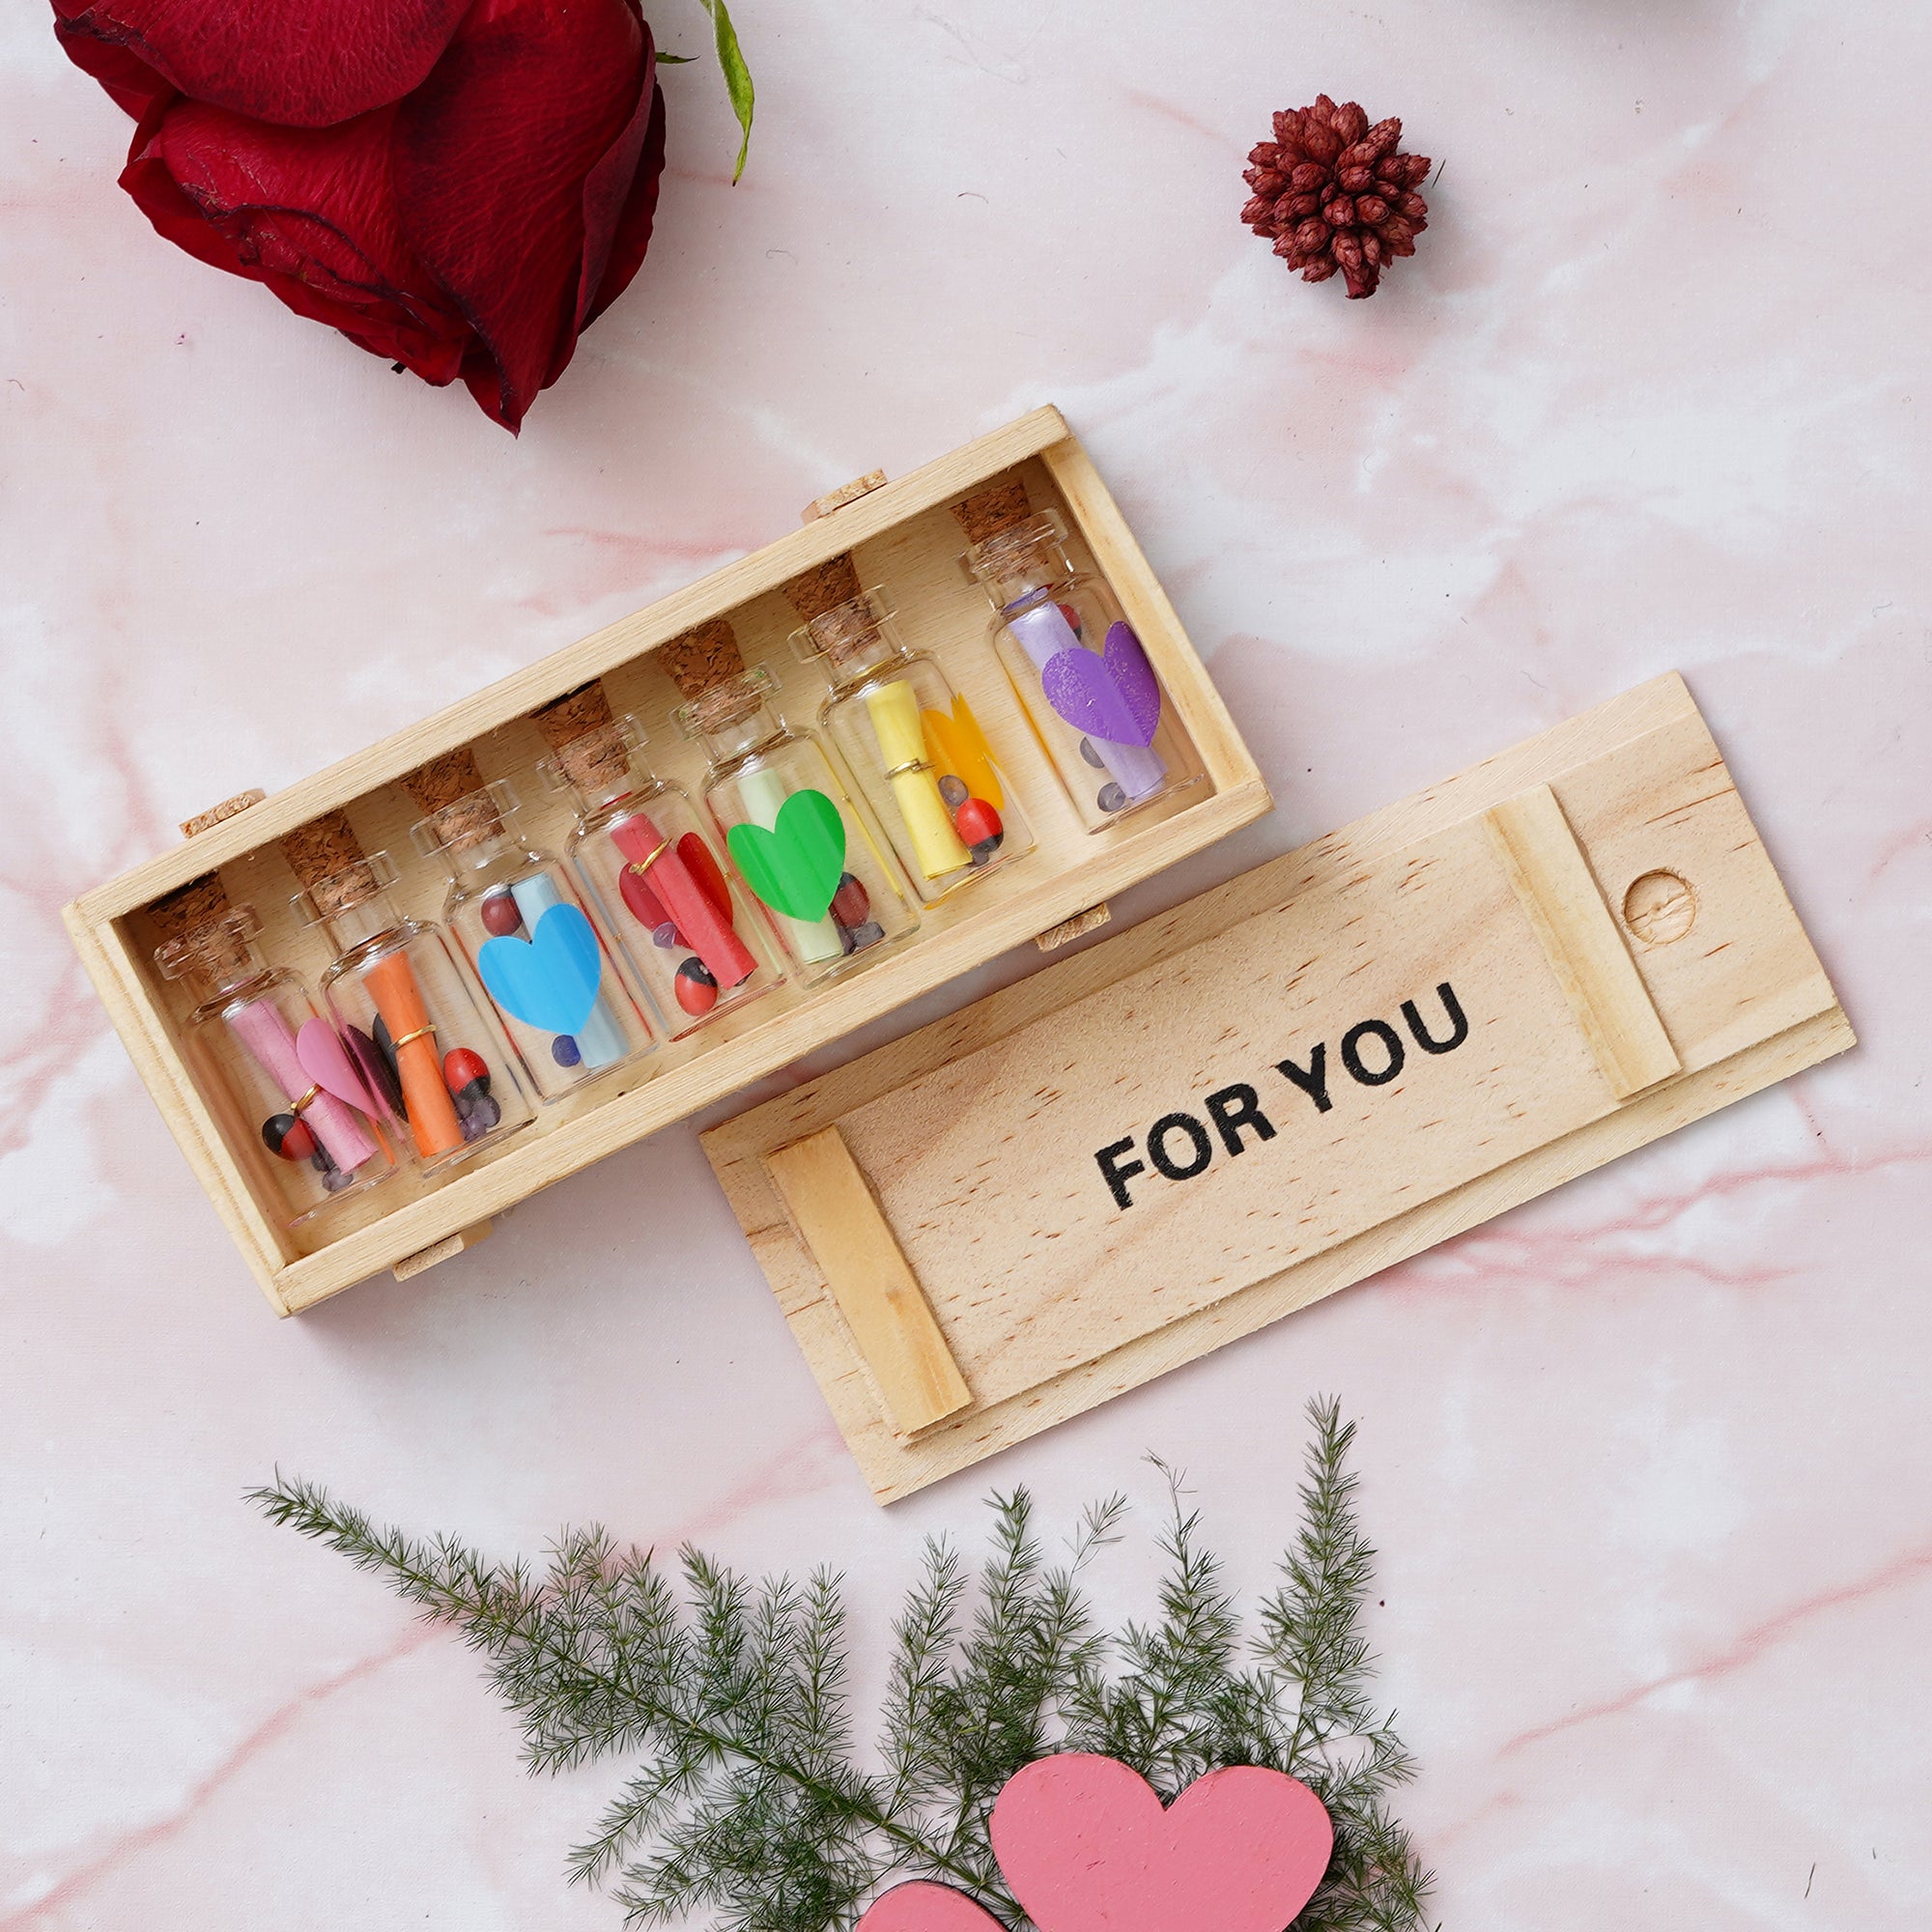 Valentine Combo of Card, Pink Heart Shaped Gift Box with Teddy and Roses, Wooden Box "For You" Message Bottle Set 5